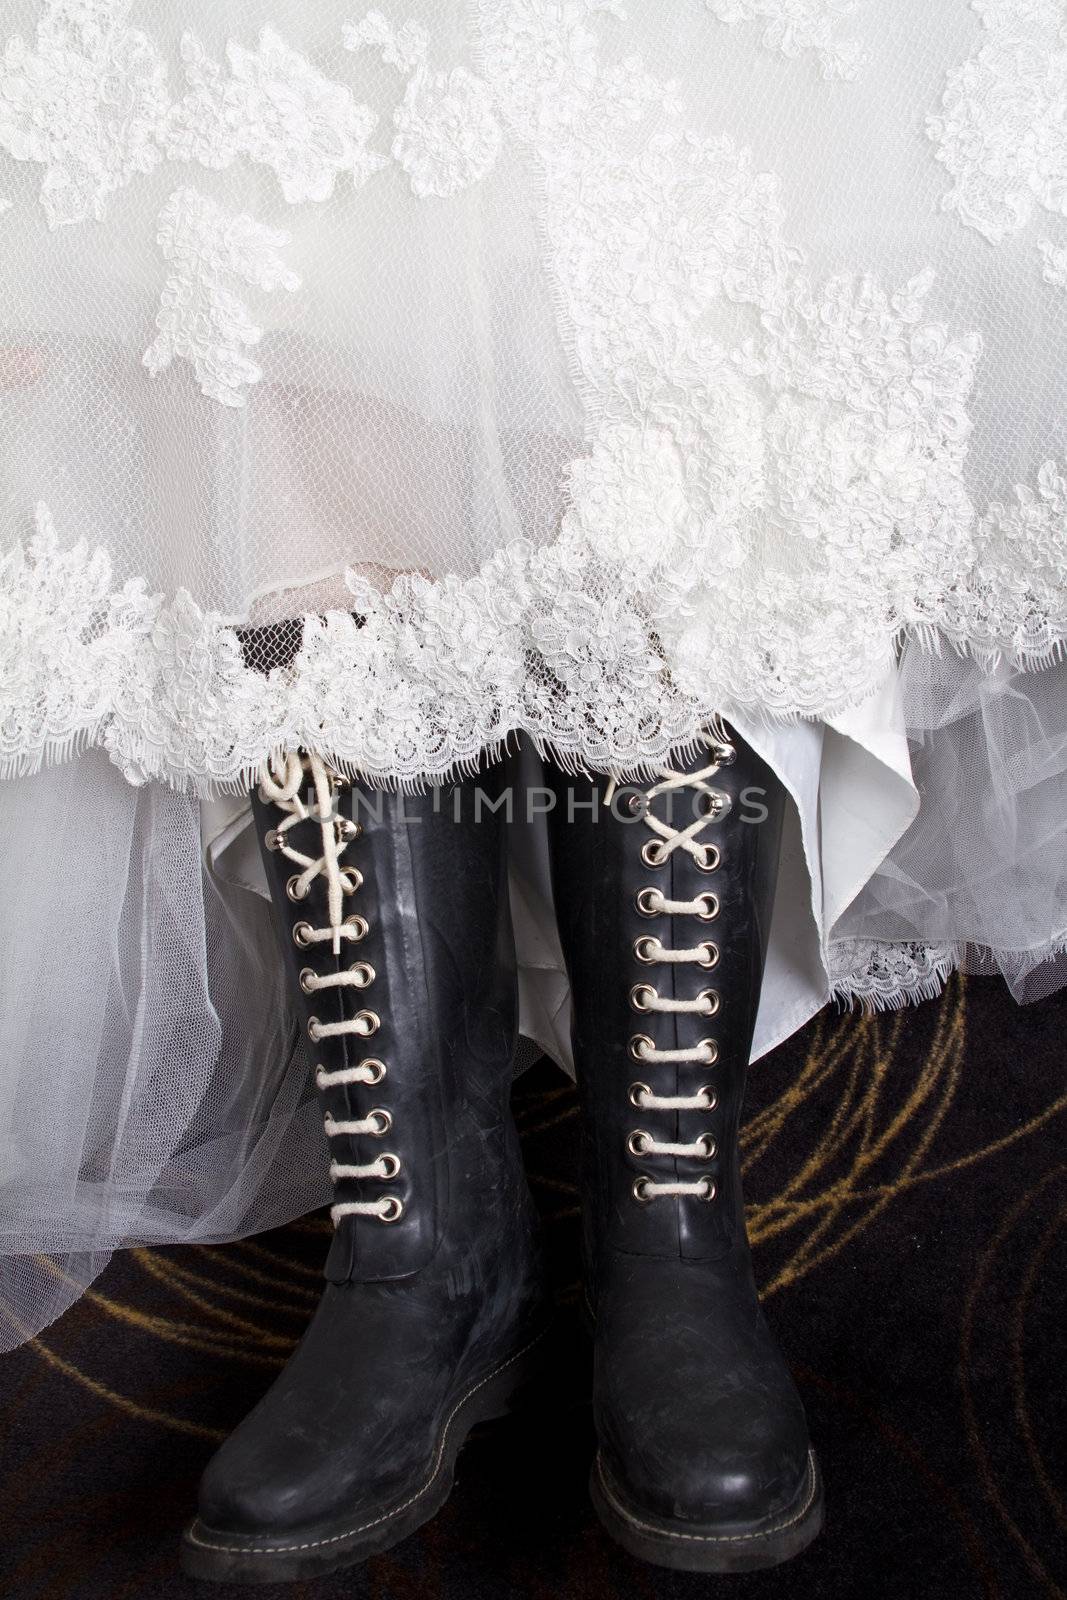 A bride wearing her wedding dress with boots.